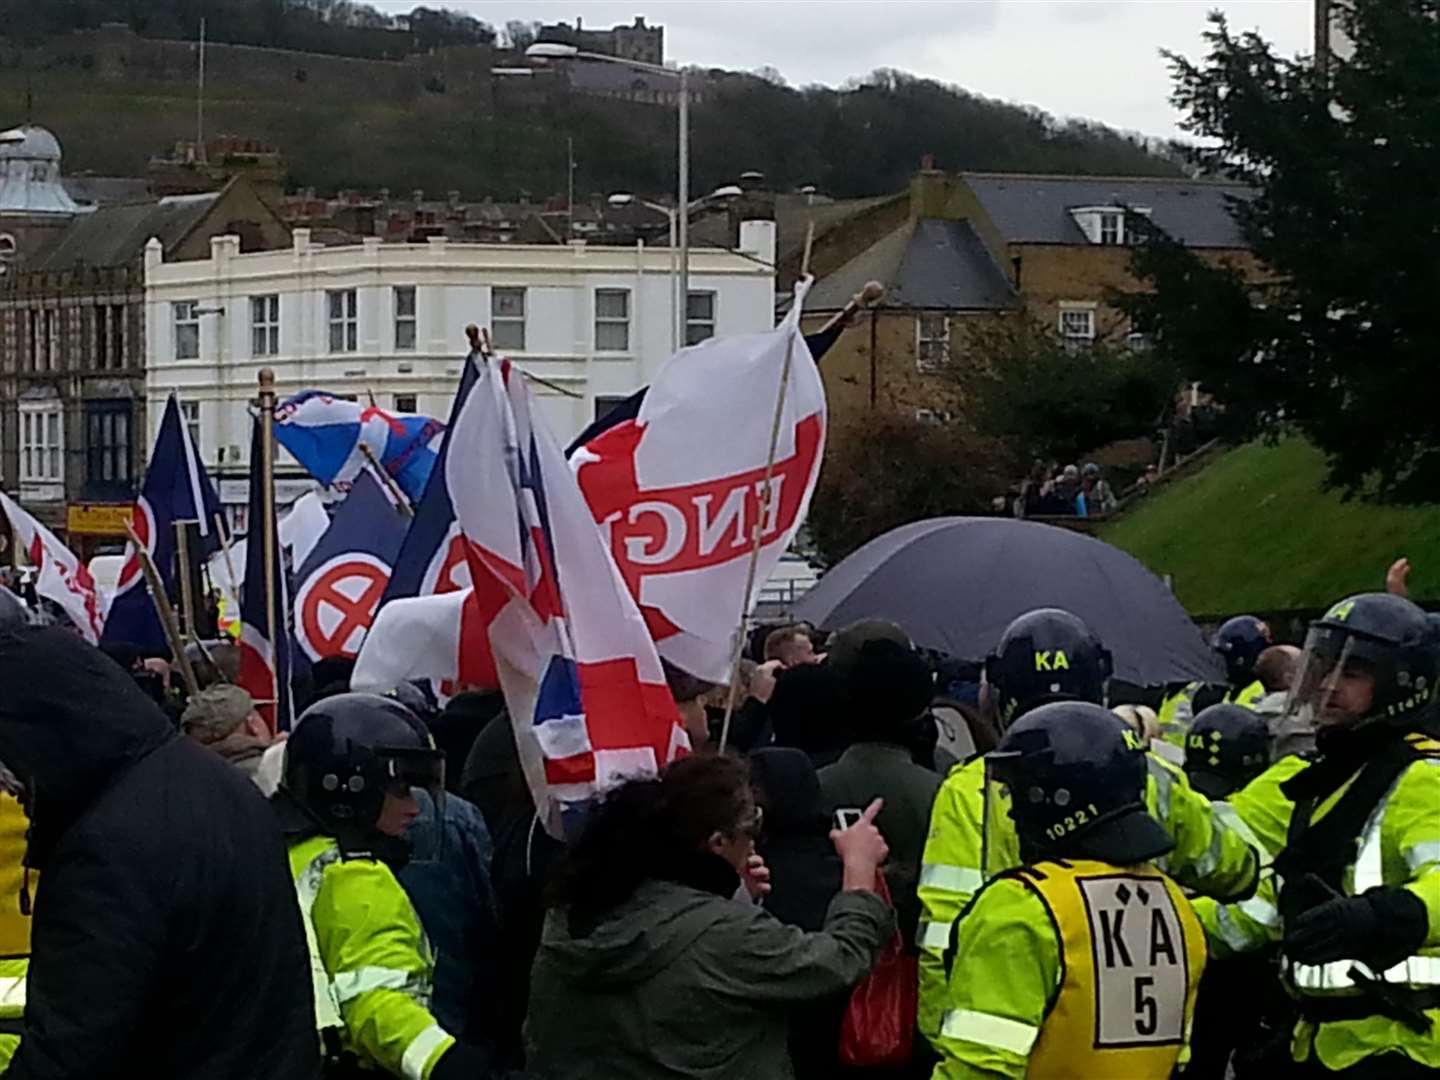 Far right marchers holding their flags and police on the day of the rioting.